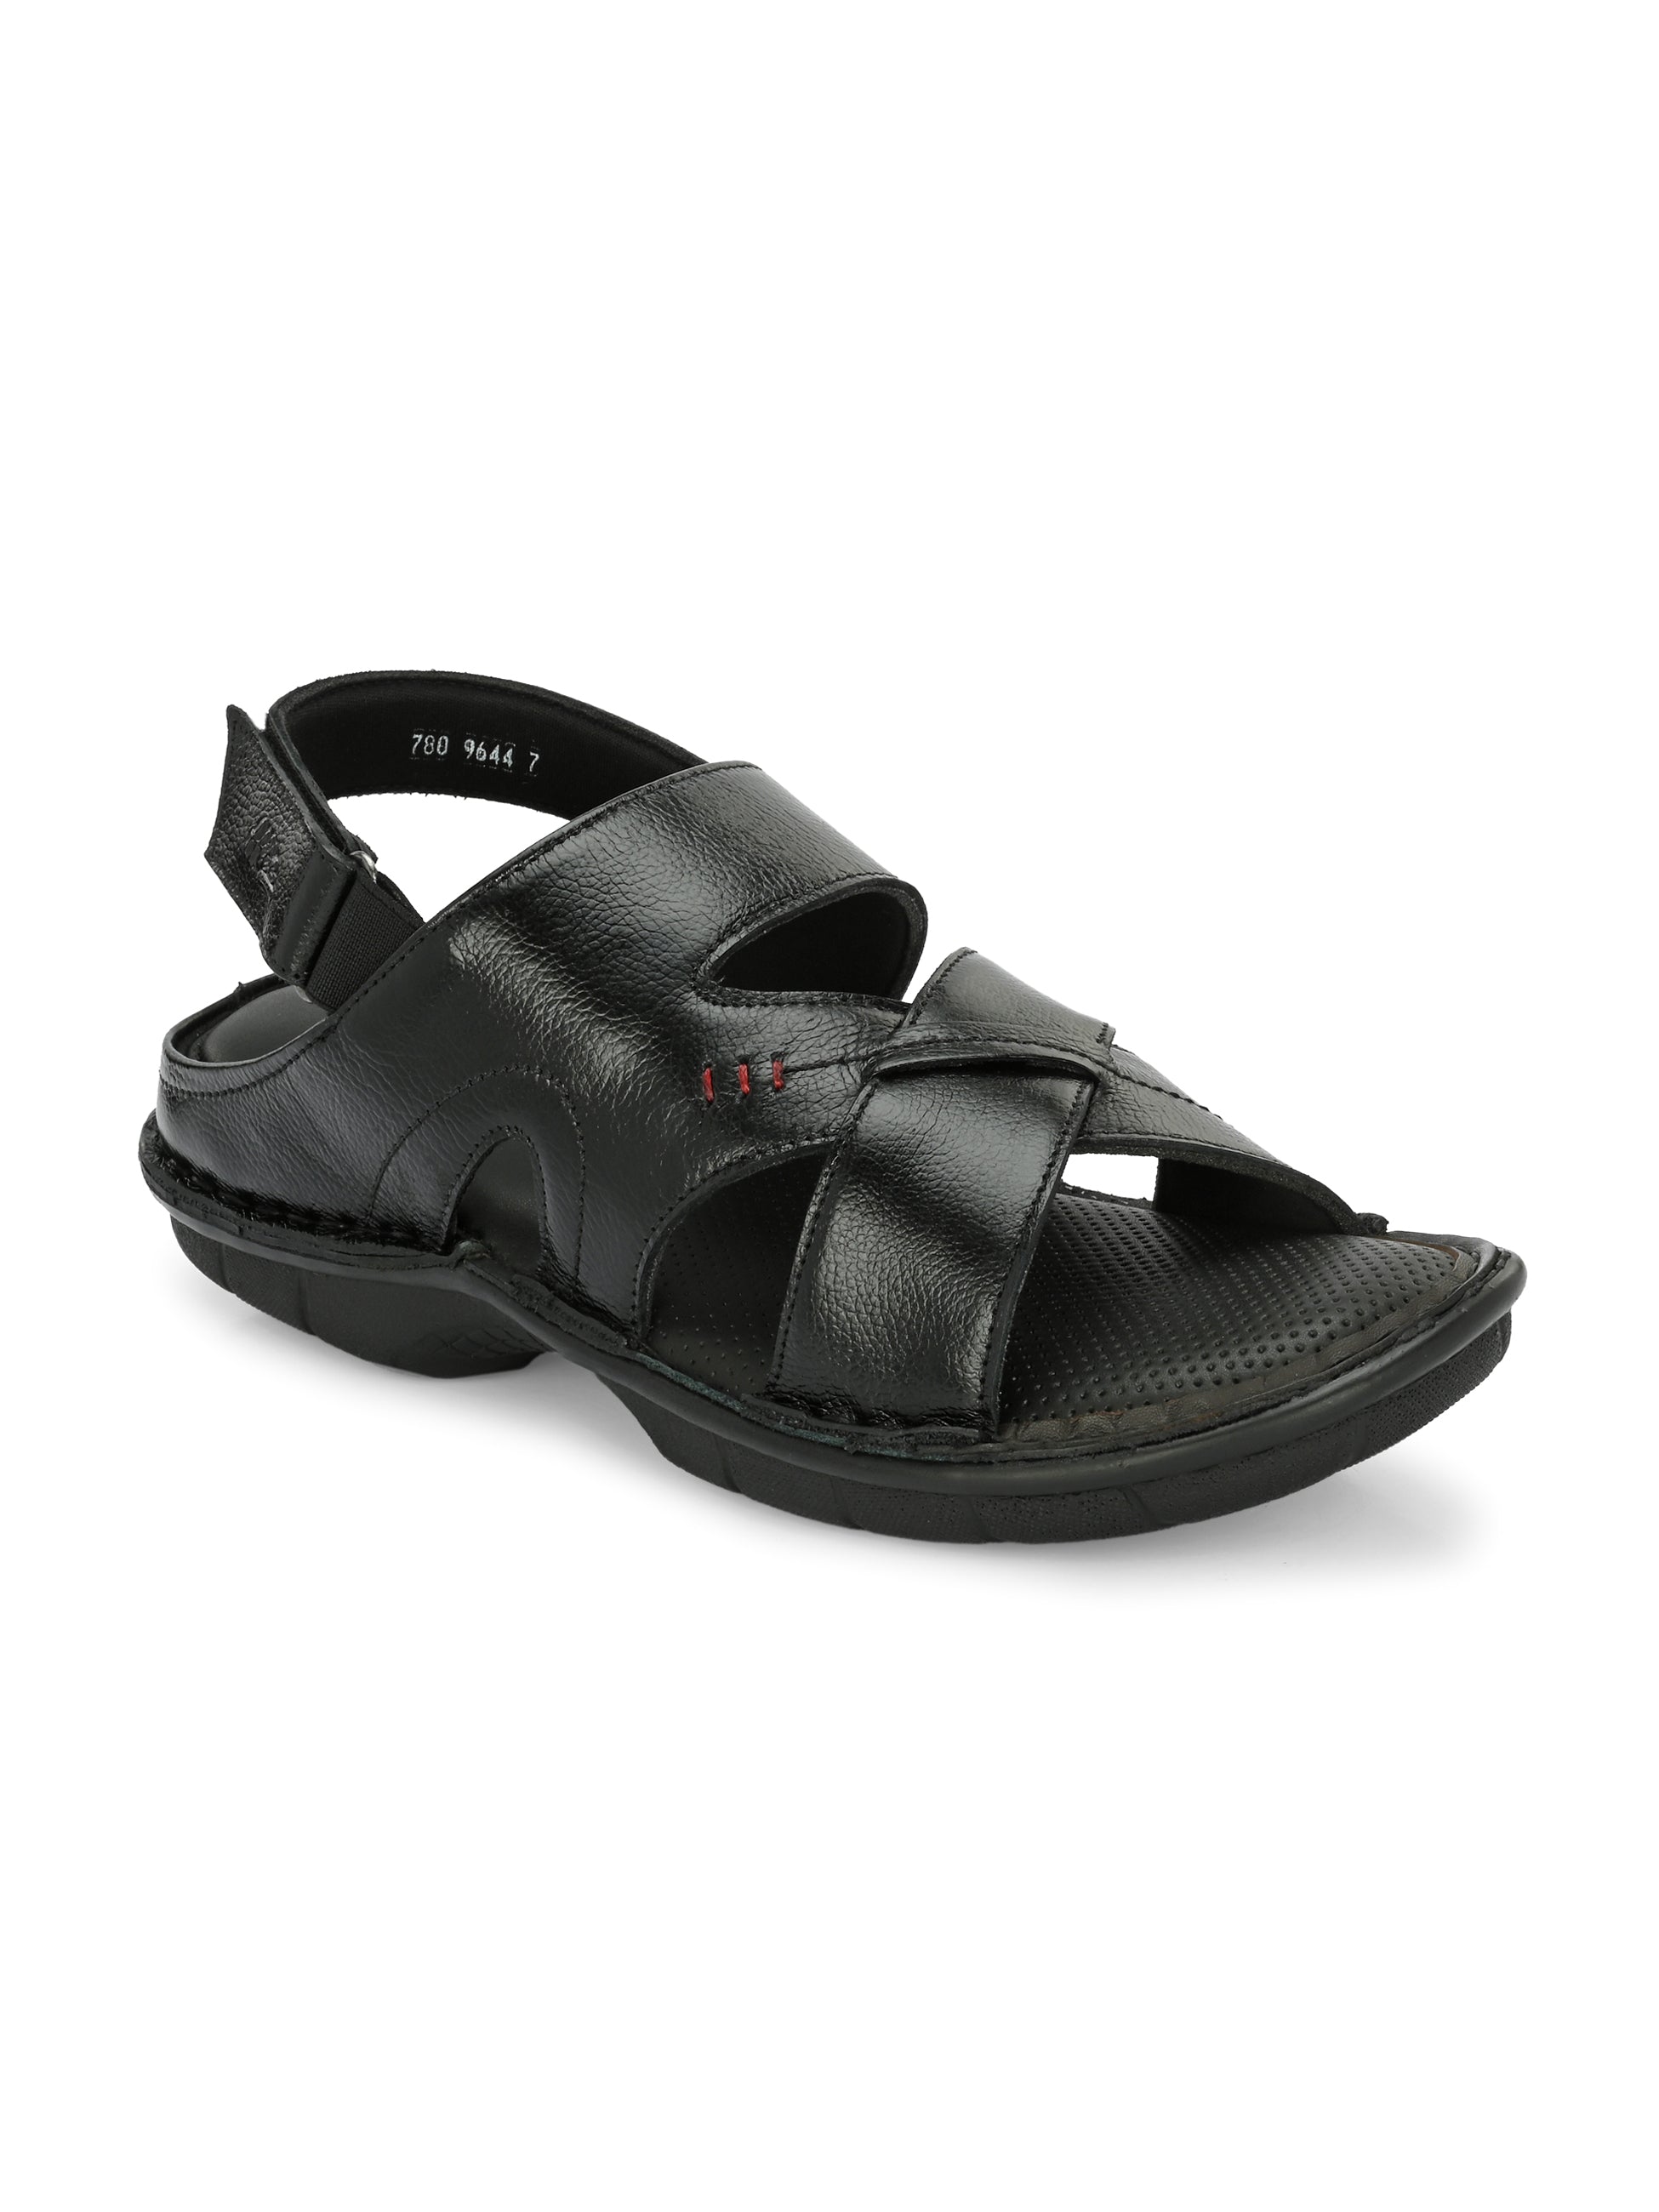 Luxury Mens Chypre The Row Sandals Adjustable Strap, Comfortable Footwear  For Casual Walking, Beach Slide, And Summer Brown/Black/White EU38 46 From  Williamlina, $31.93 | DHgate.Com